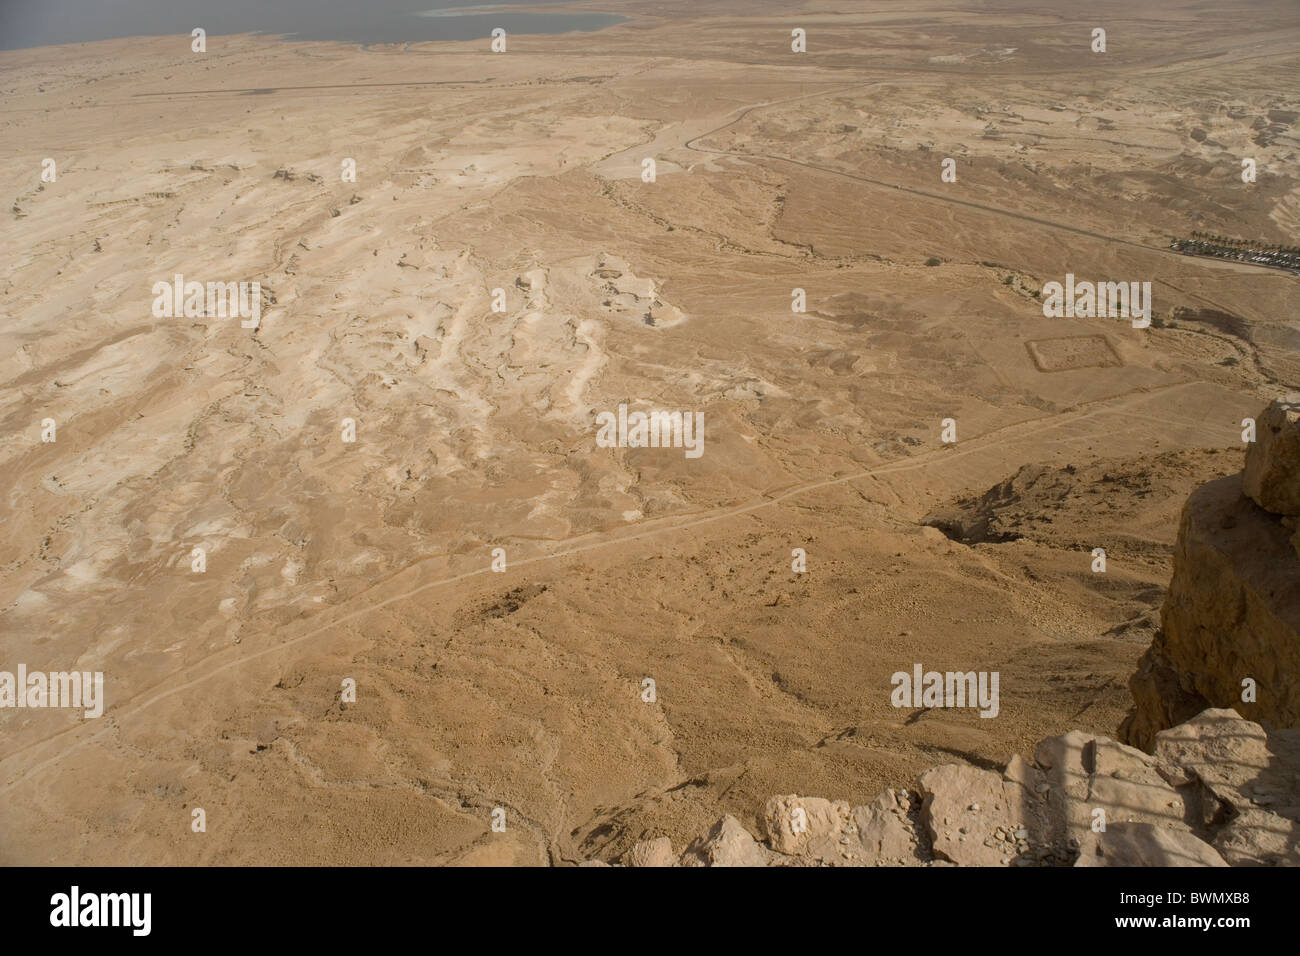 Roman camp from the top of Masada in the Dead sea Valley, Israel Stock Photo